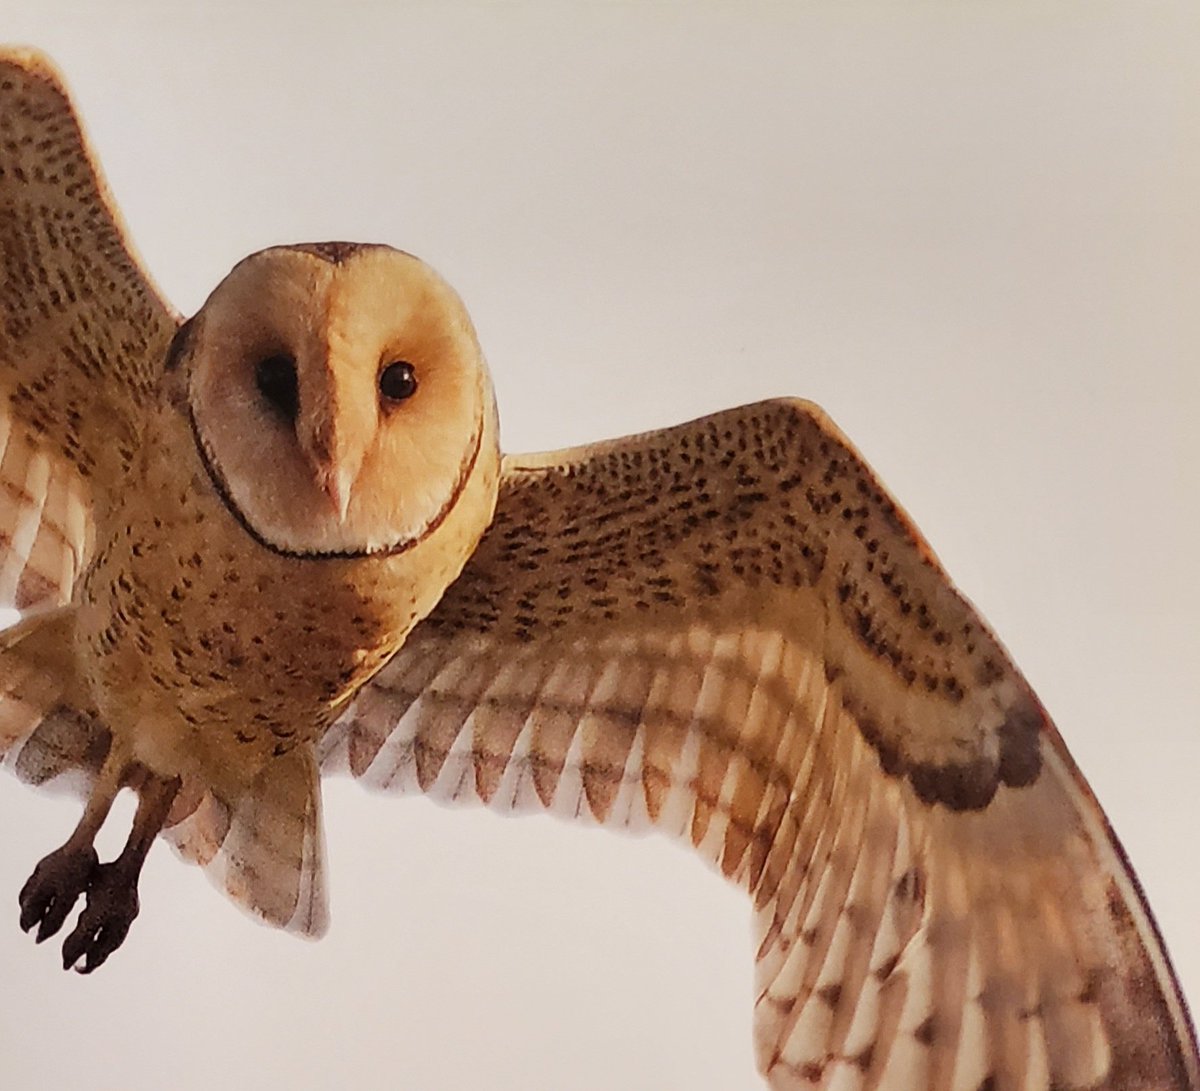 OWL OF THE DAY: african grass owl (tyto capensis) medium sized barn owl with long legs. long white facial disk with darkspots on underside. nocturnal hunter, it turns into the breeze for lift while listening for prey on the ground. catches bats in flight. subsaharan habitat.